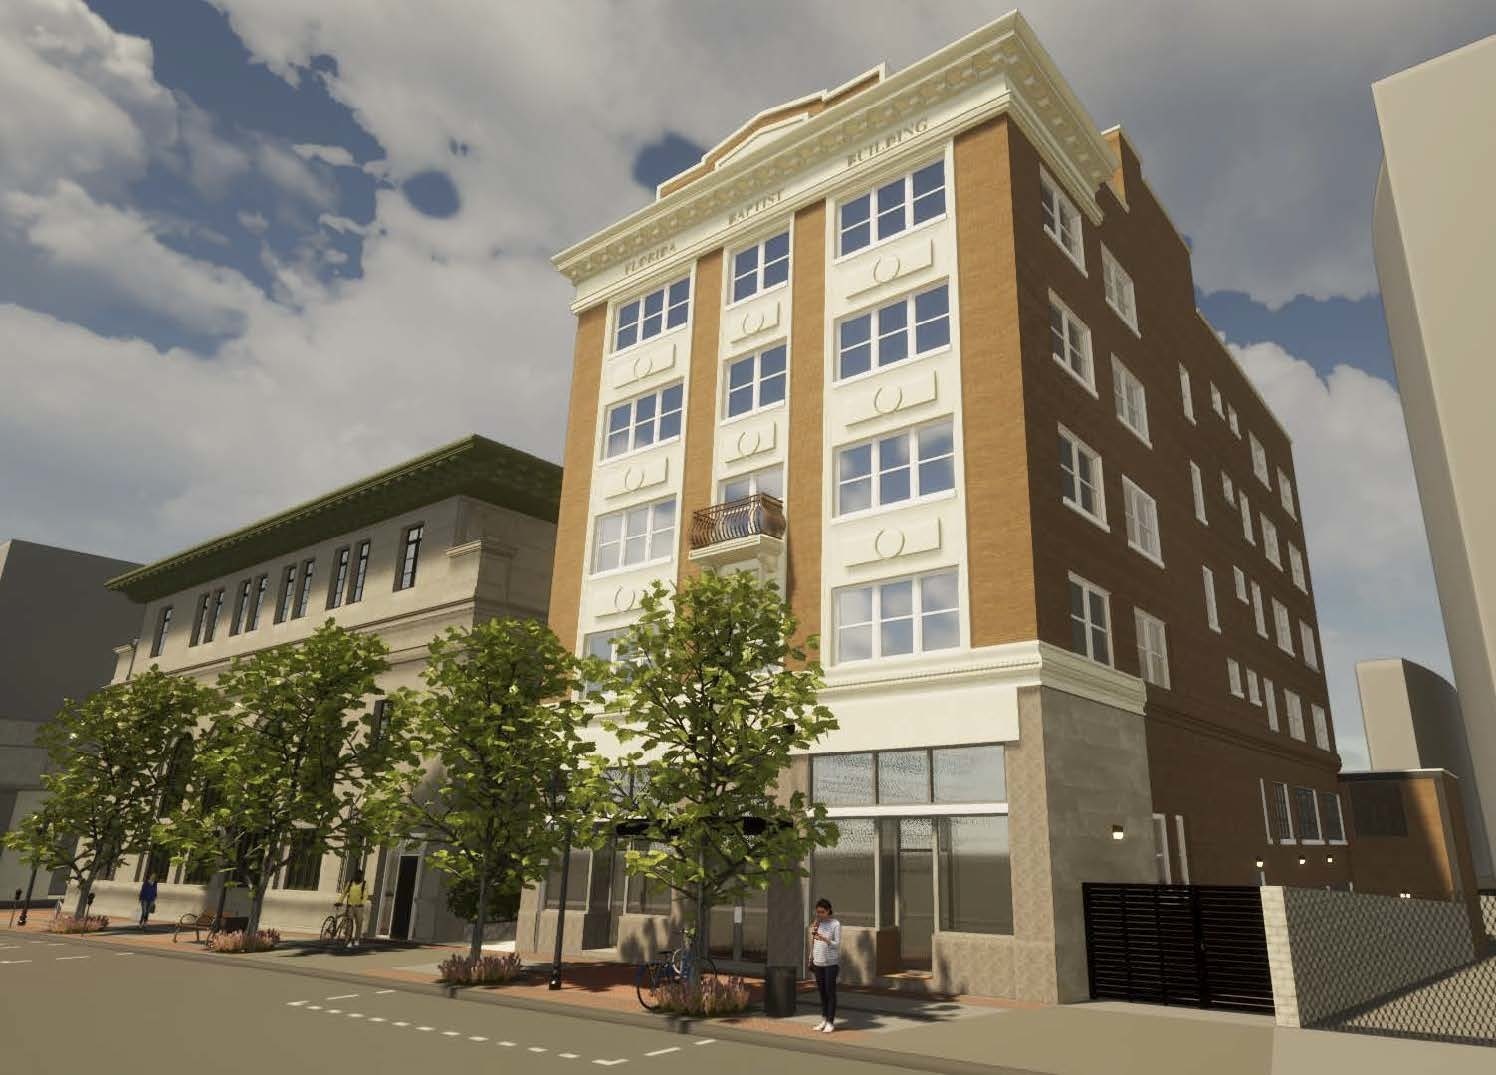 J. Lea Florals will open on the first floor of the Florida Baptist Building, which is being redeveloped at 218 W. Church St. in the North Core of Downtown.